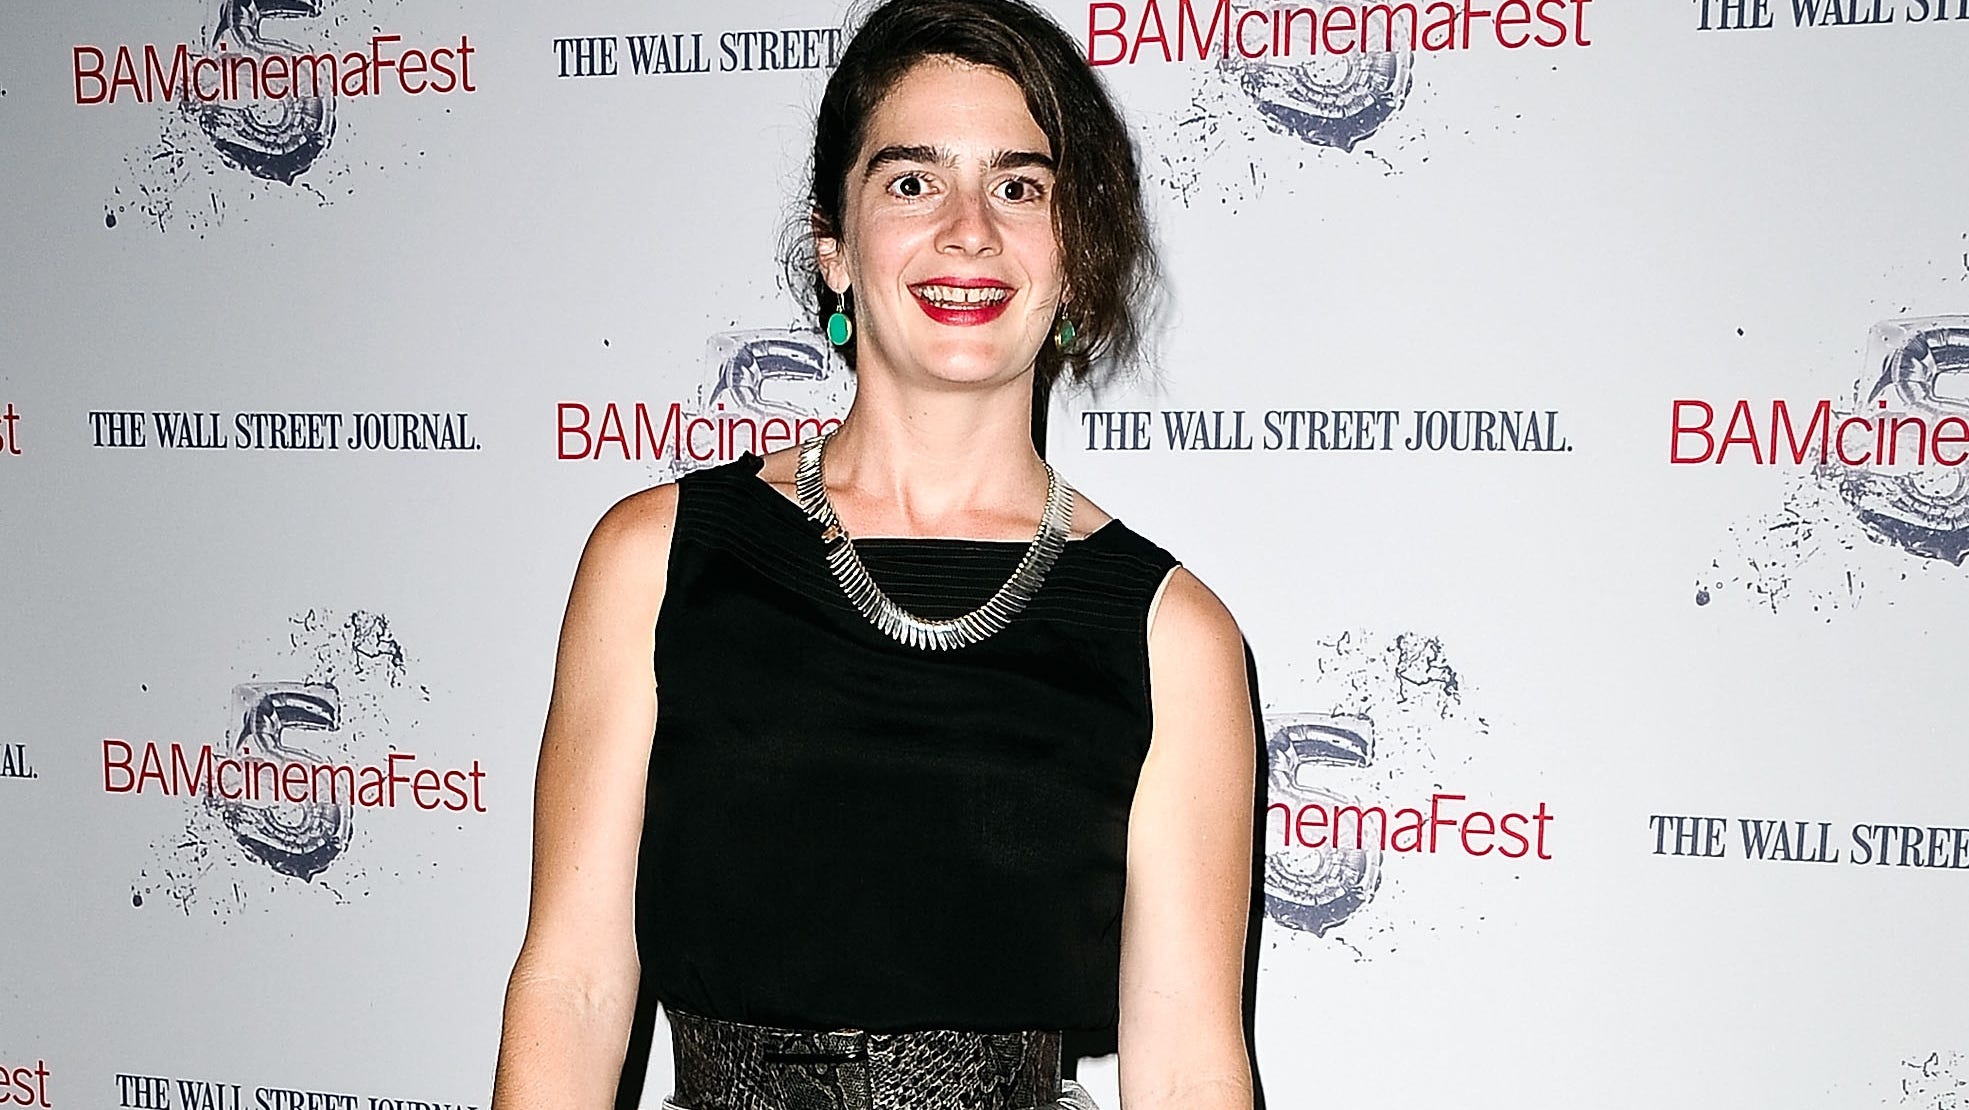 Gaby hoffmann pictures